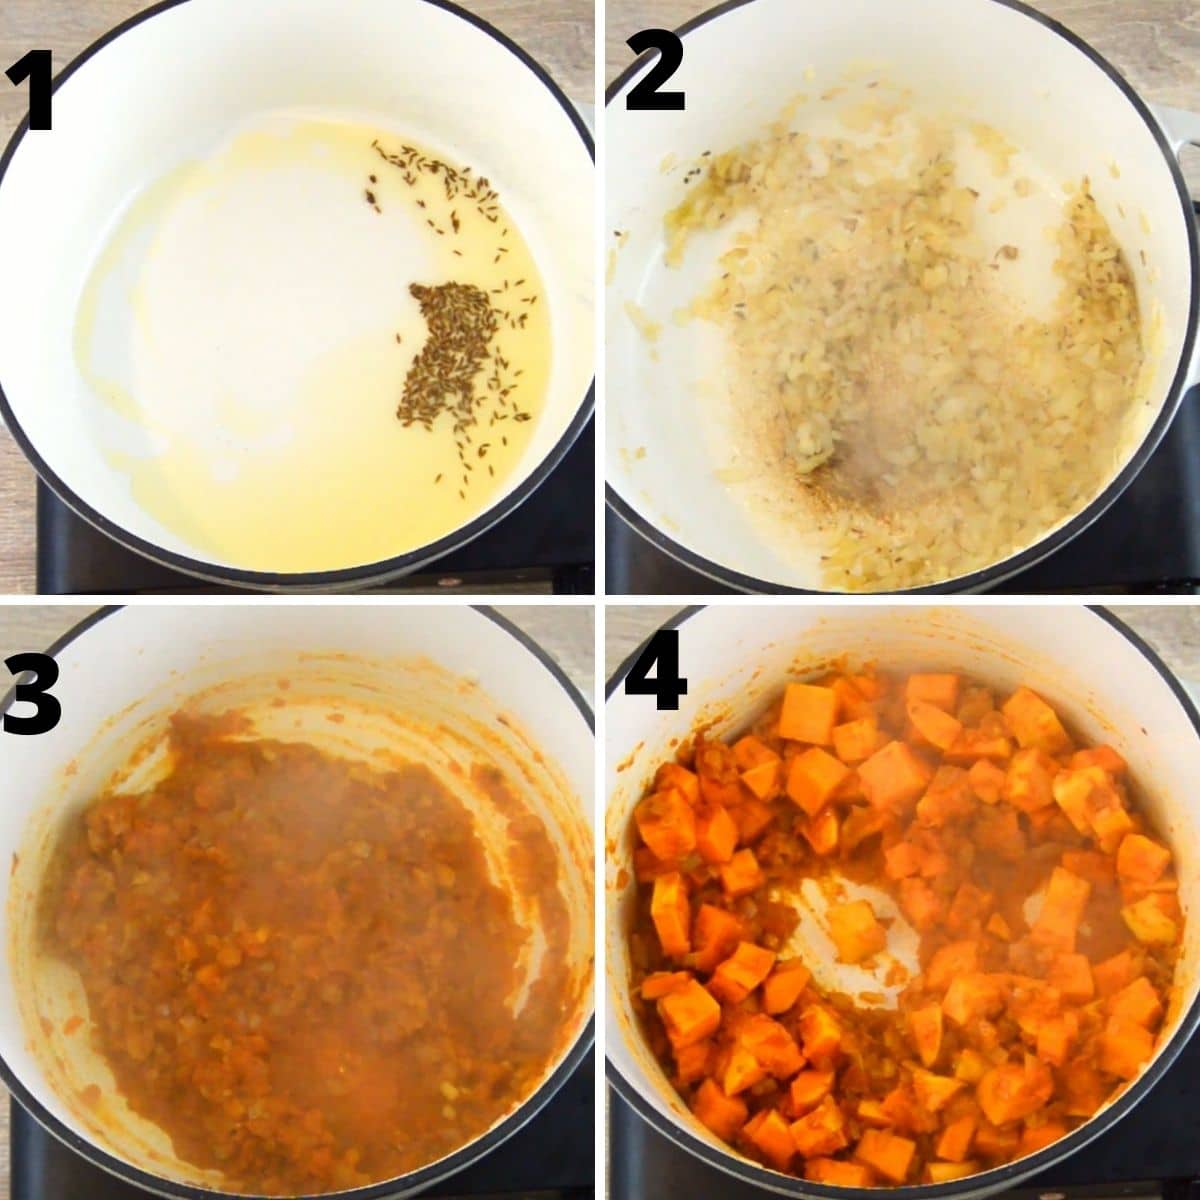 collage of 4 images showing the process of frying spices and vegetables in a ceramic pot.